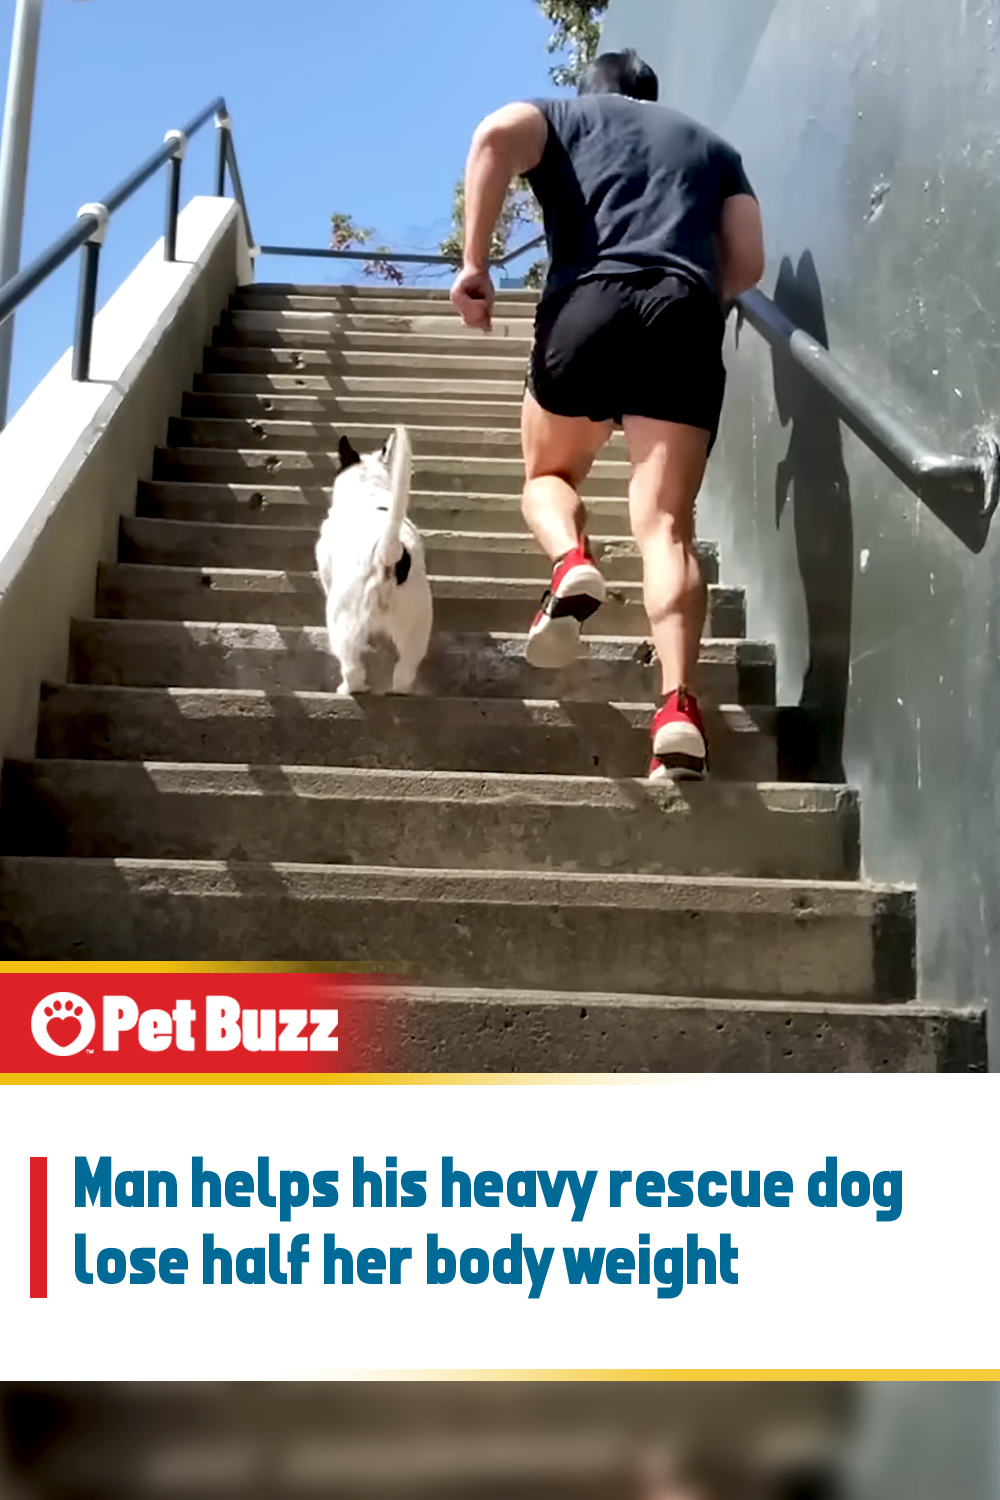 Man helps his heavy rescue dog lose half her body weight